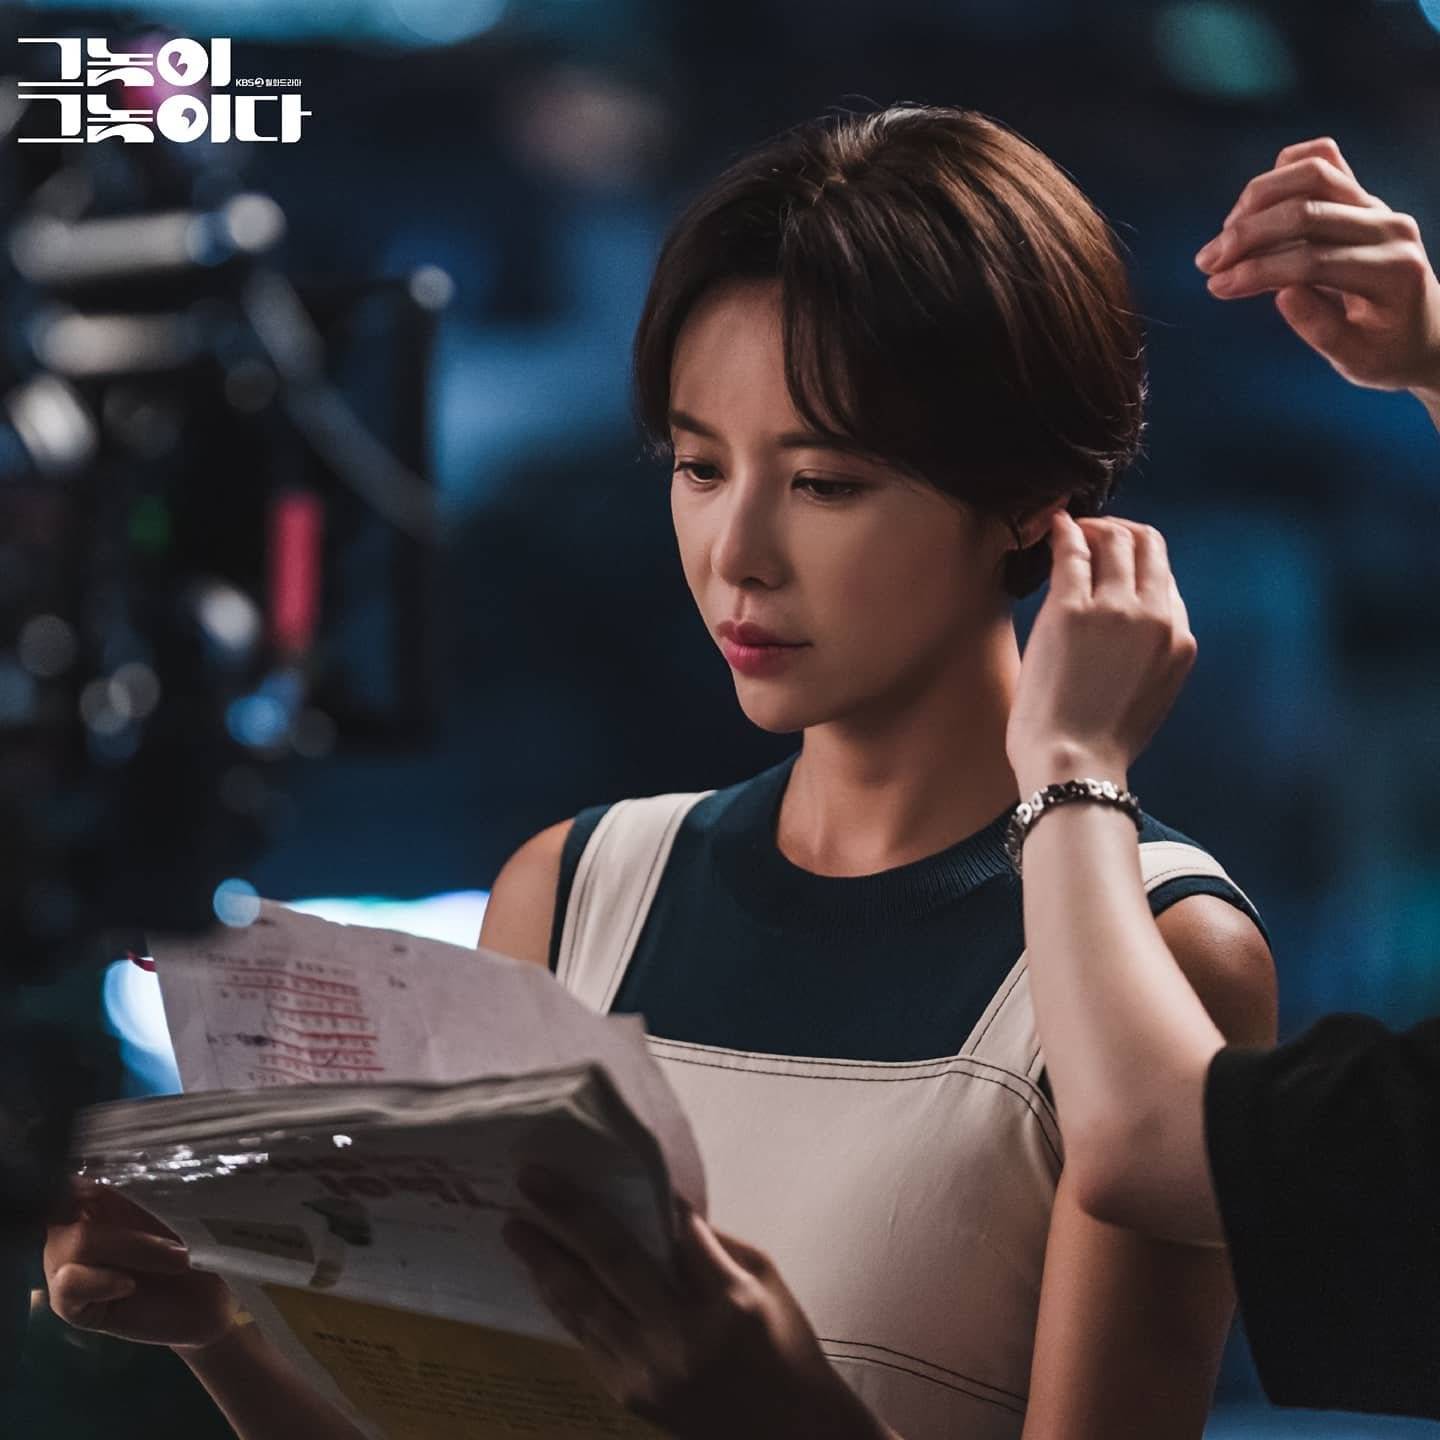 [Photos] New Behind the Scenes Images Added for the Korean Drama 